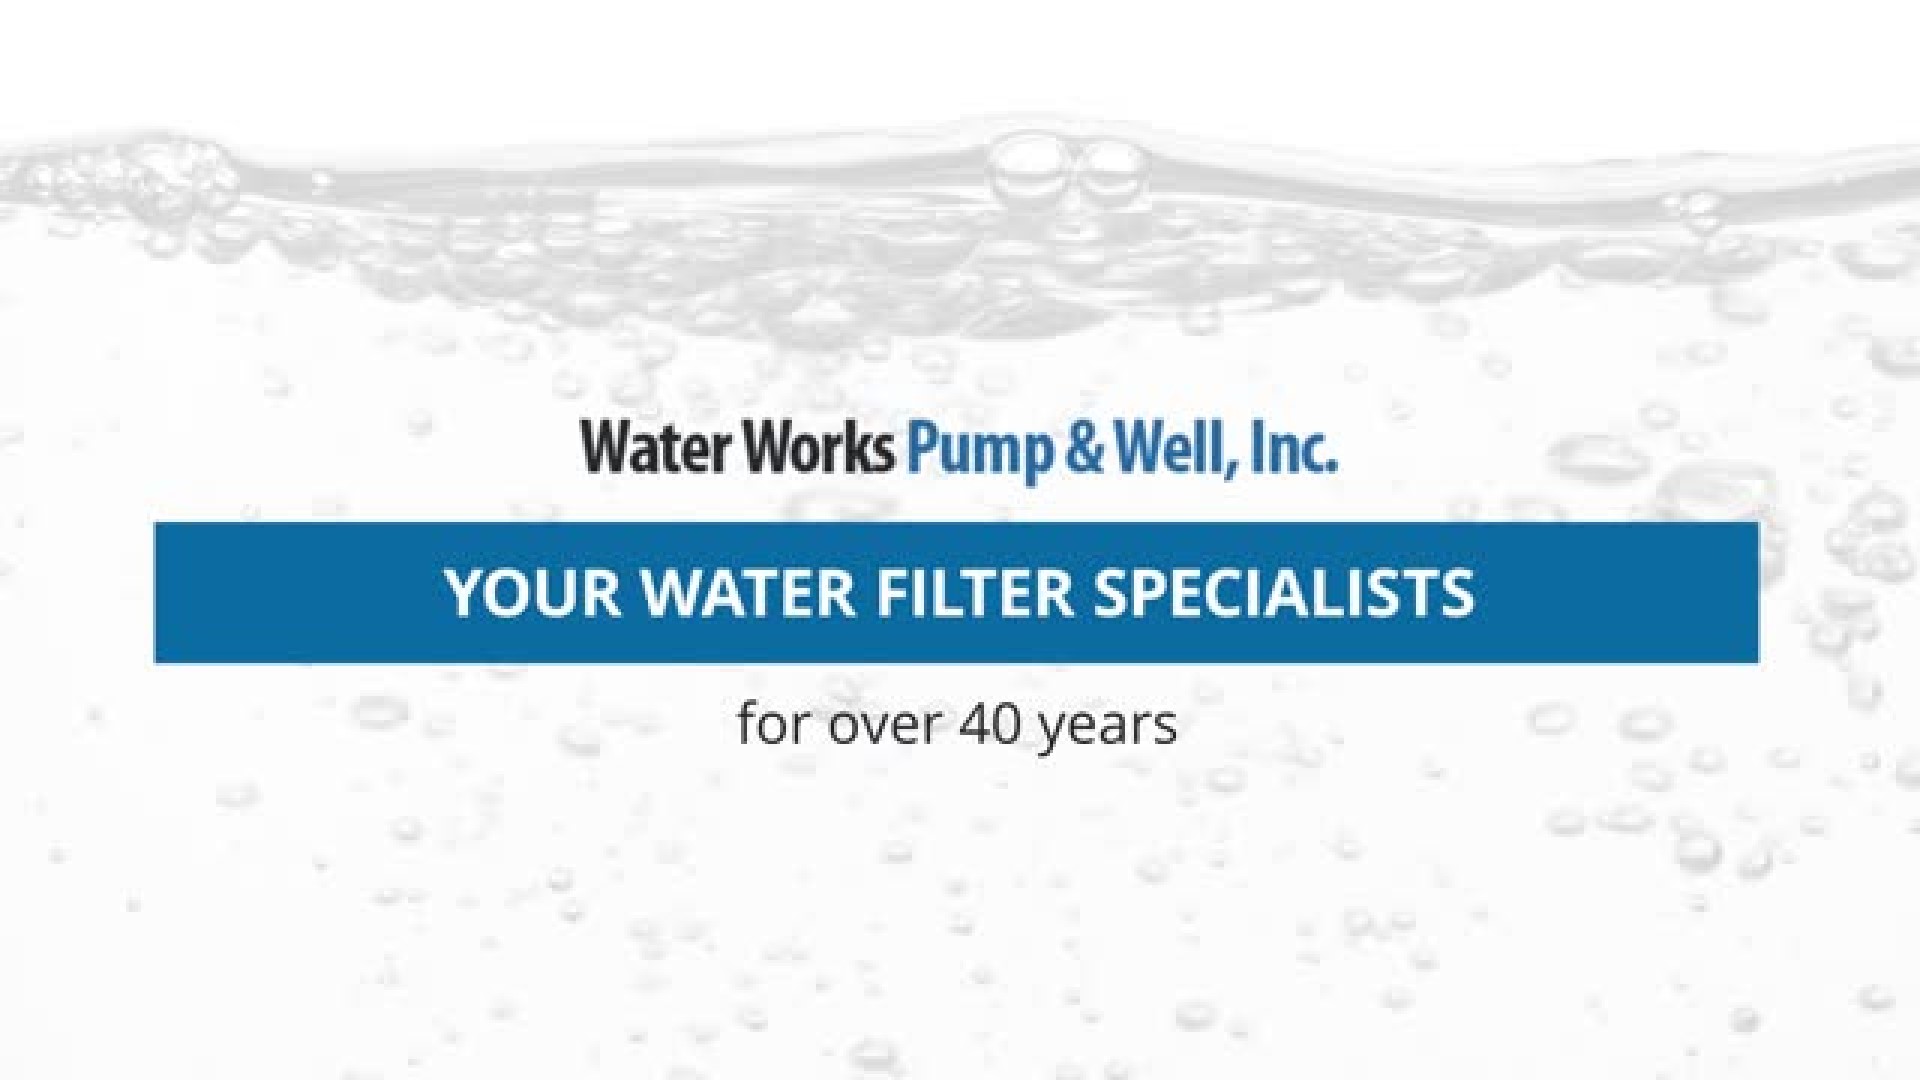 Water Works Pump & Well, Inc